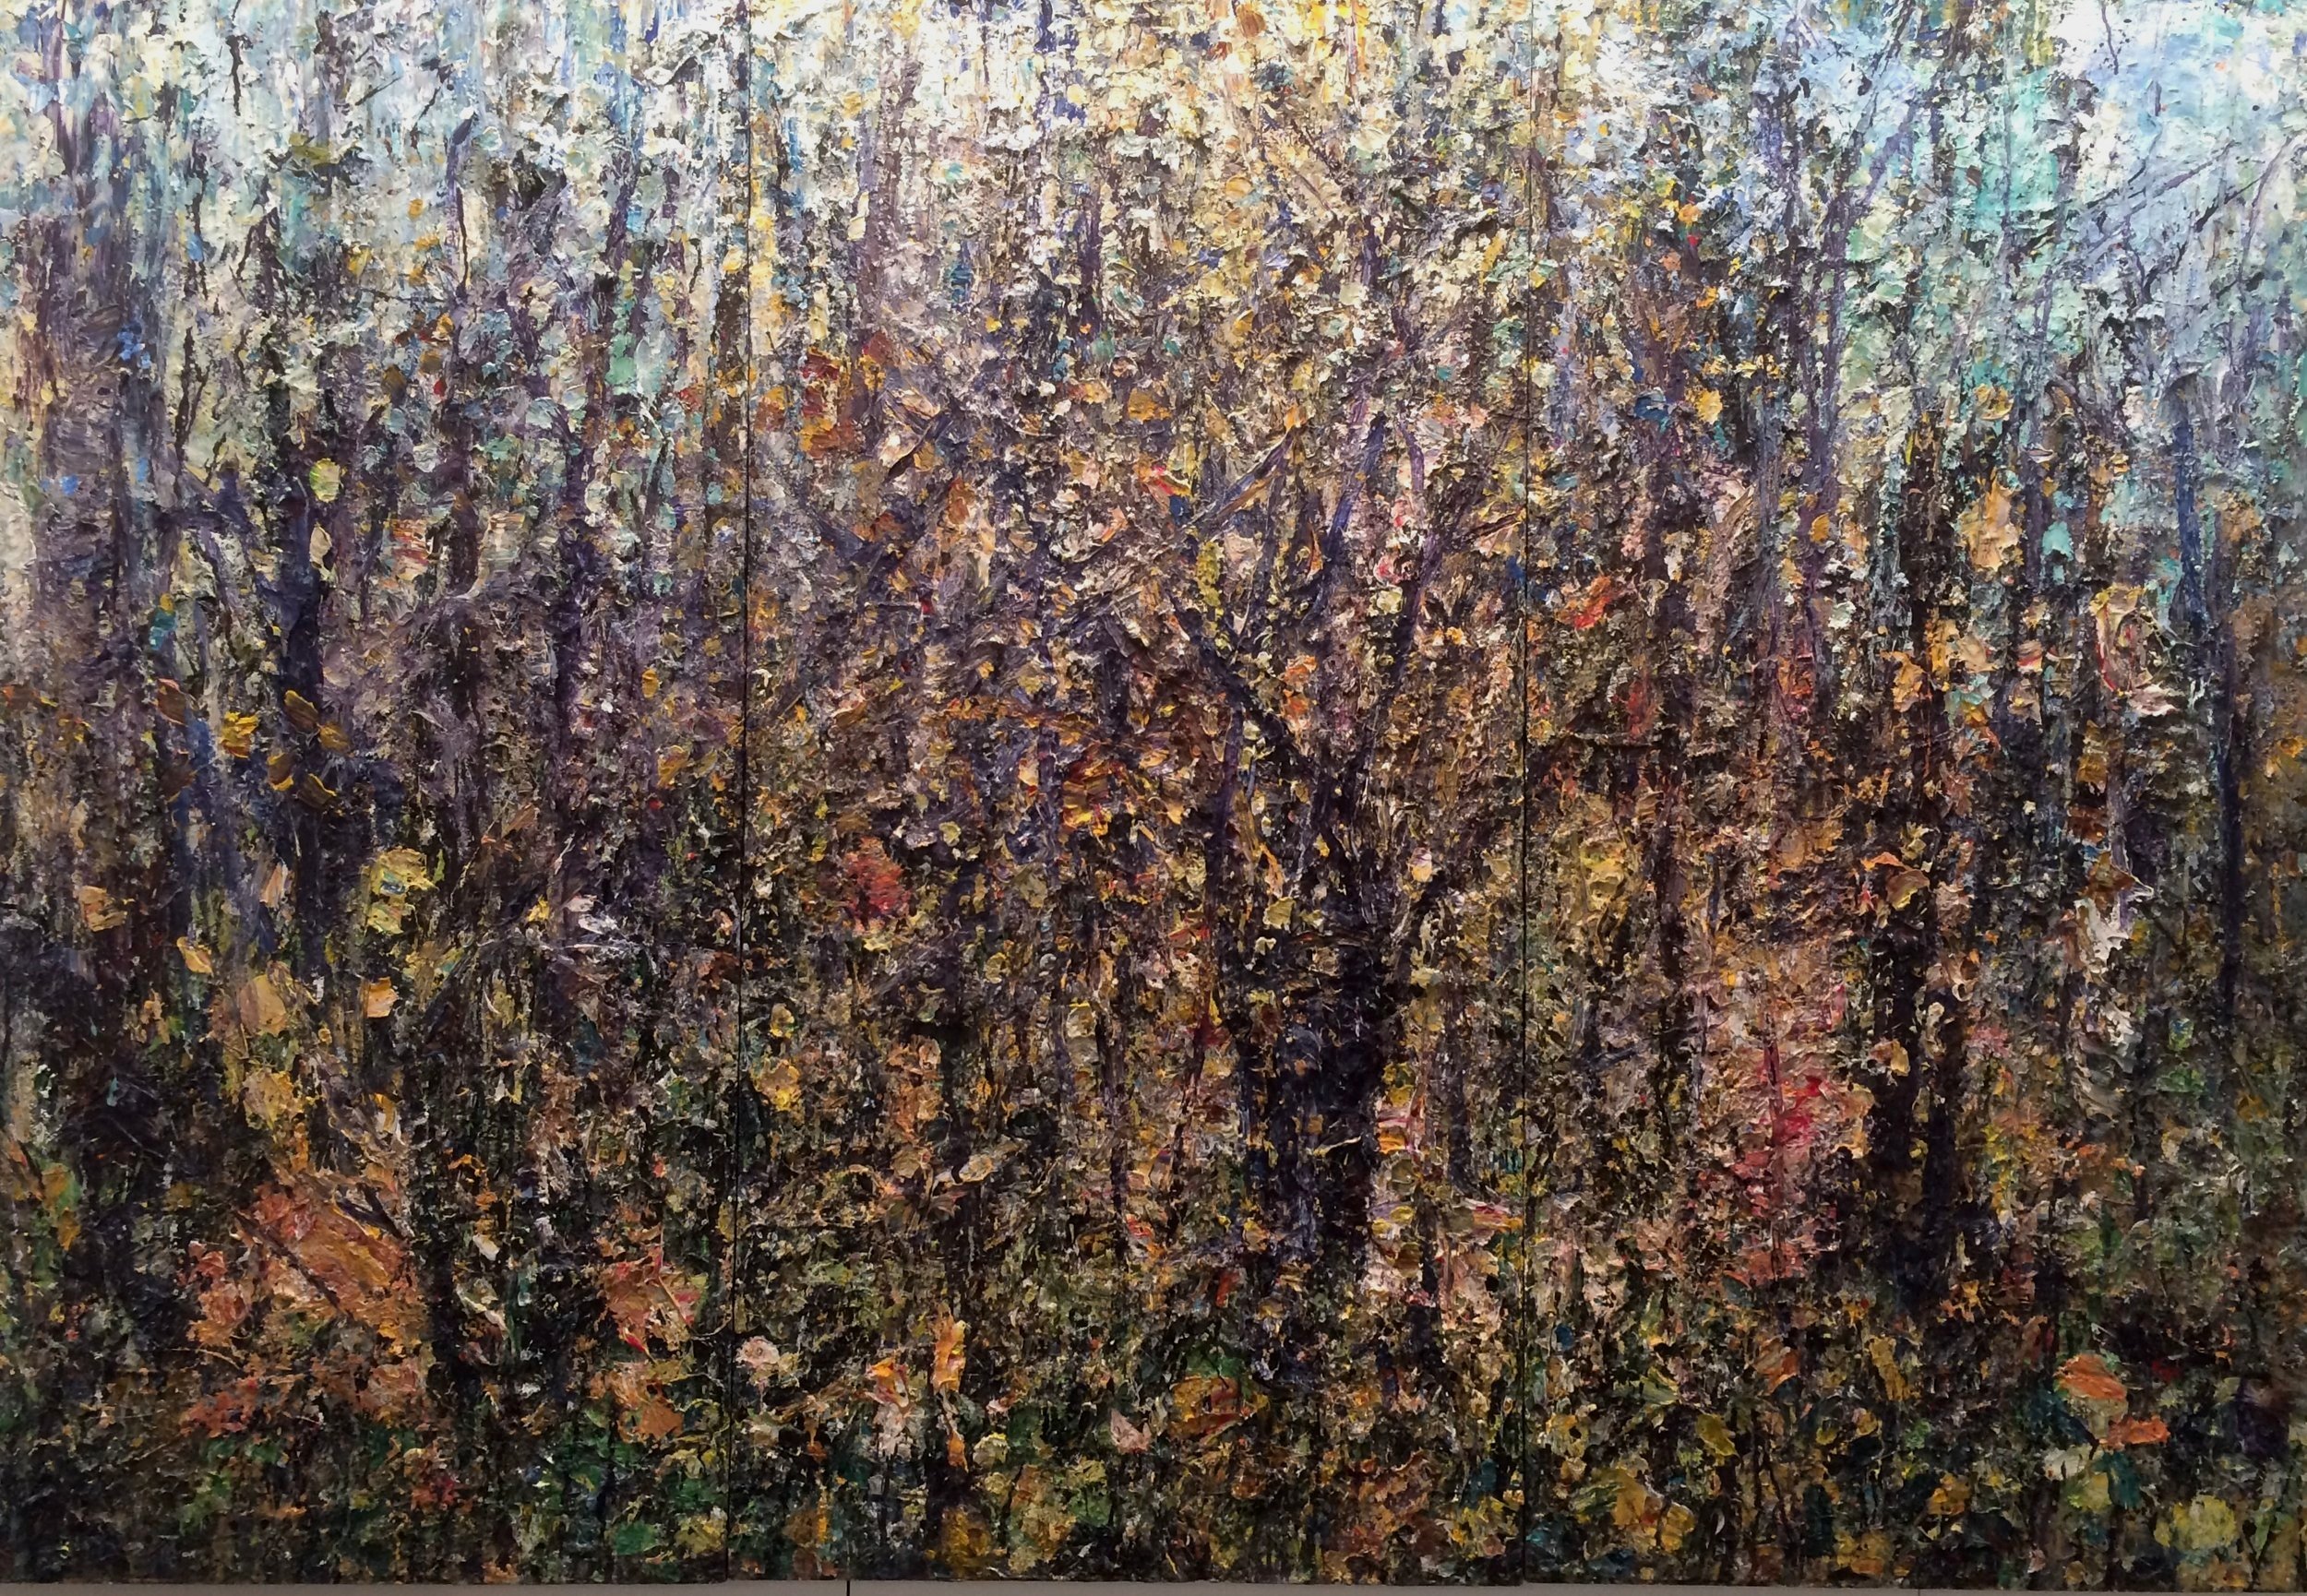    Feral Orchard 1-11-13    2013 acrylic on plywood 72”x105” $35,000 